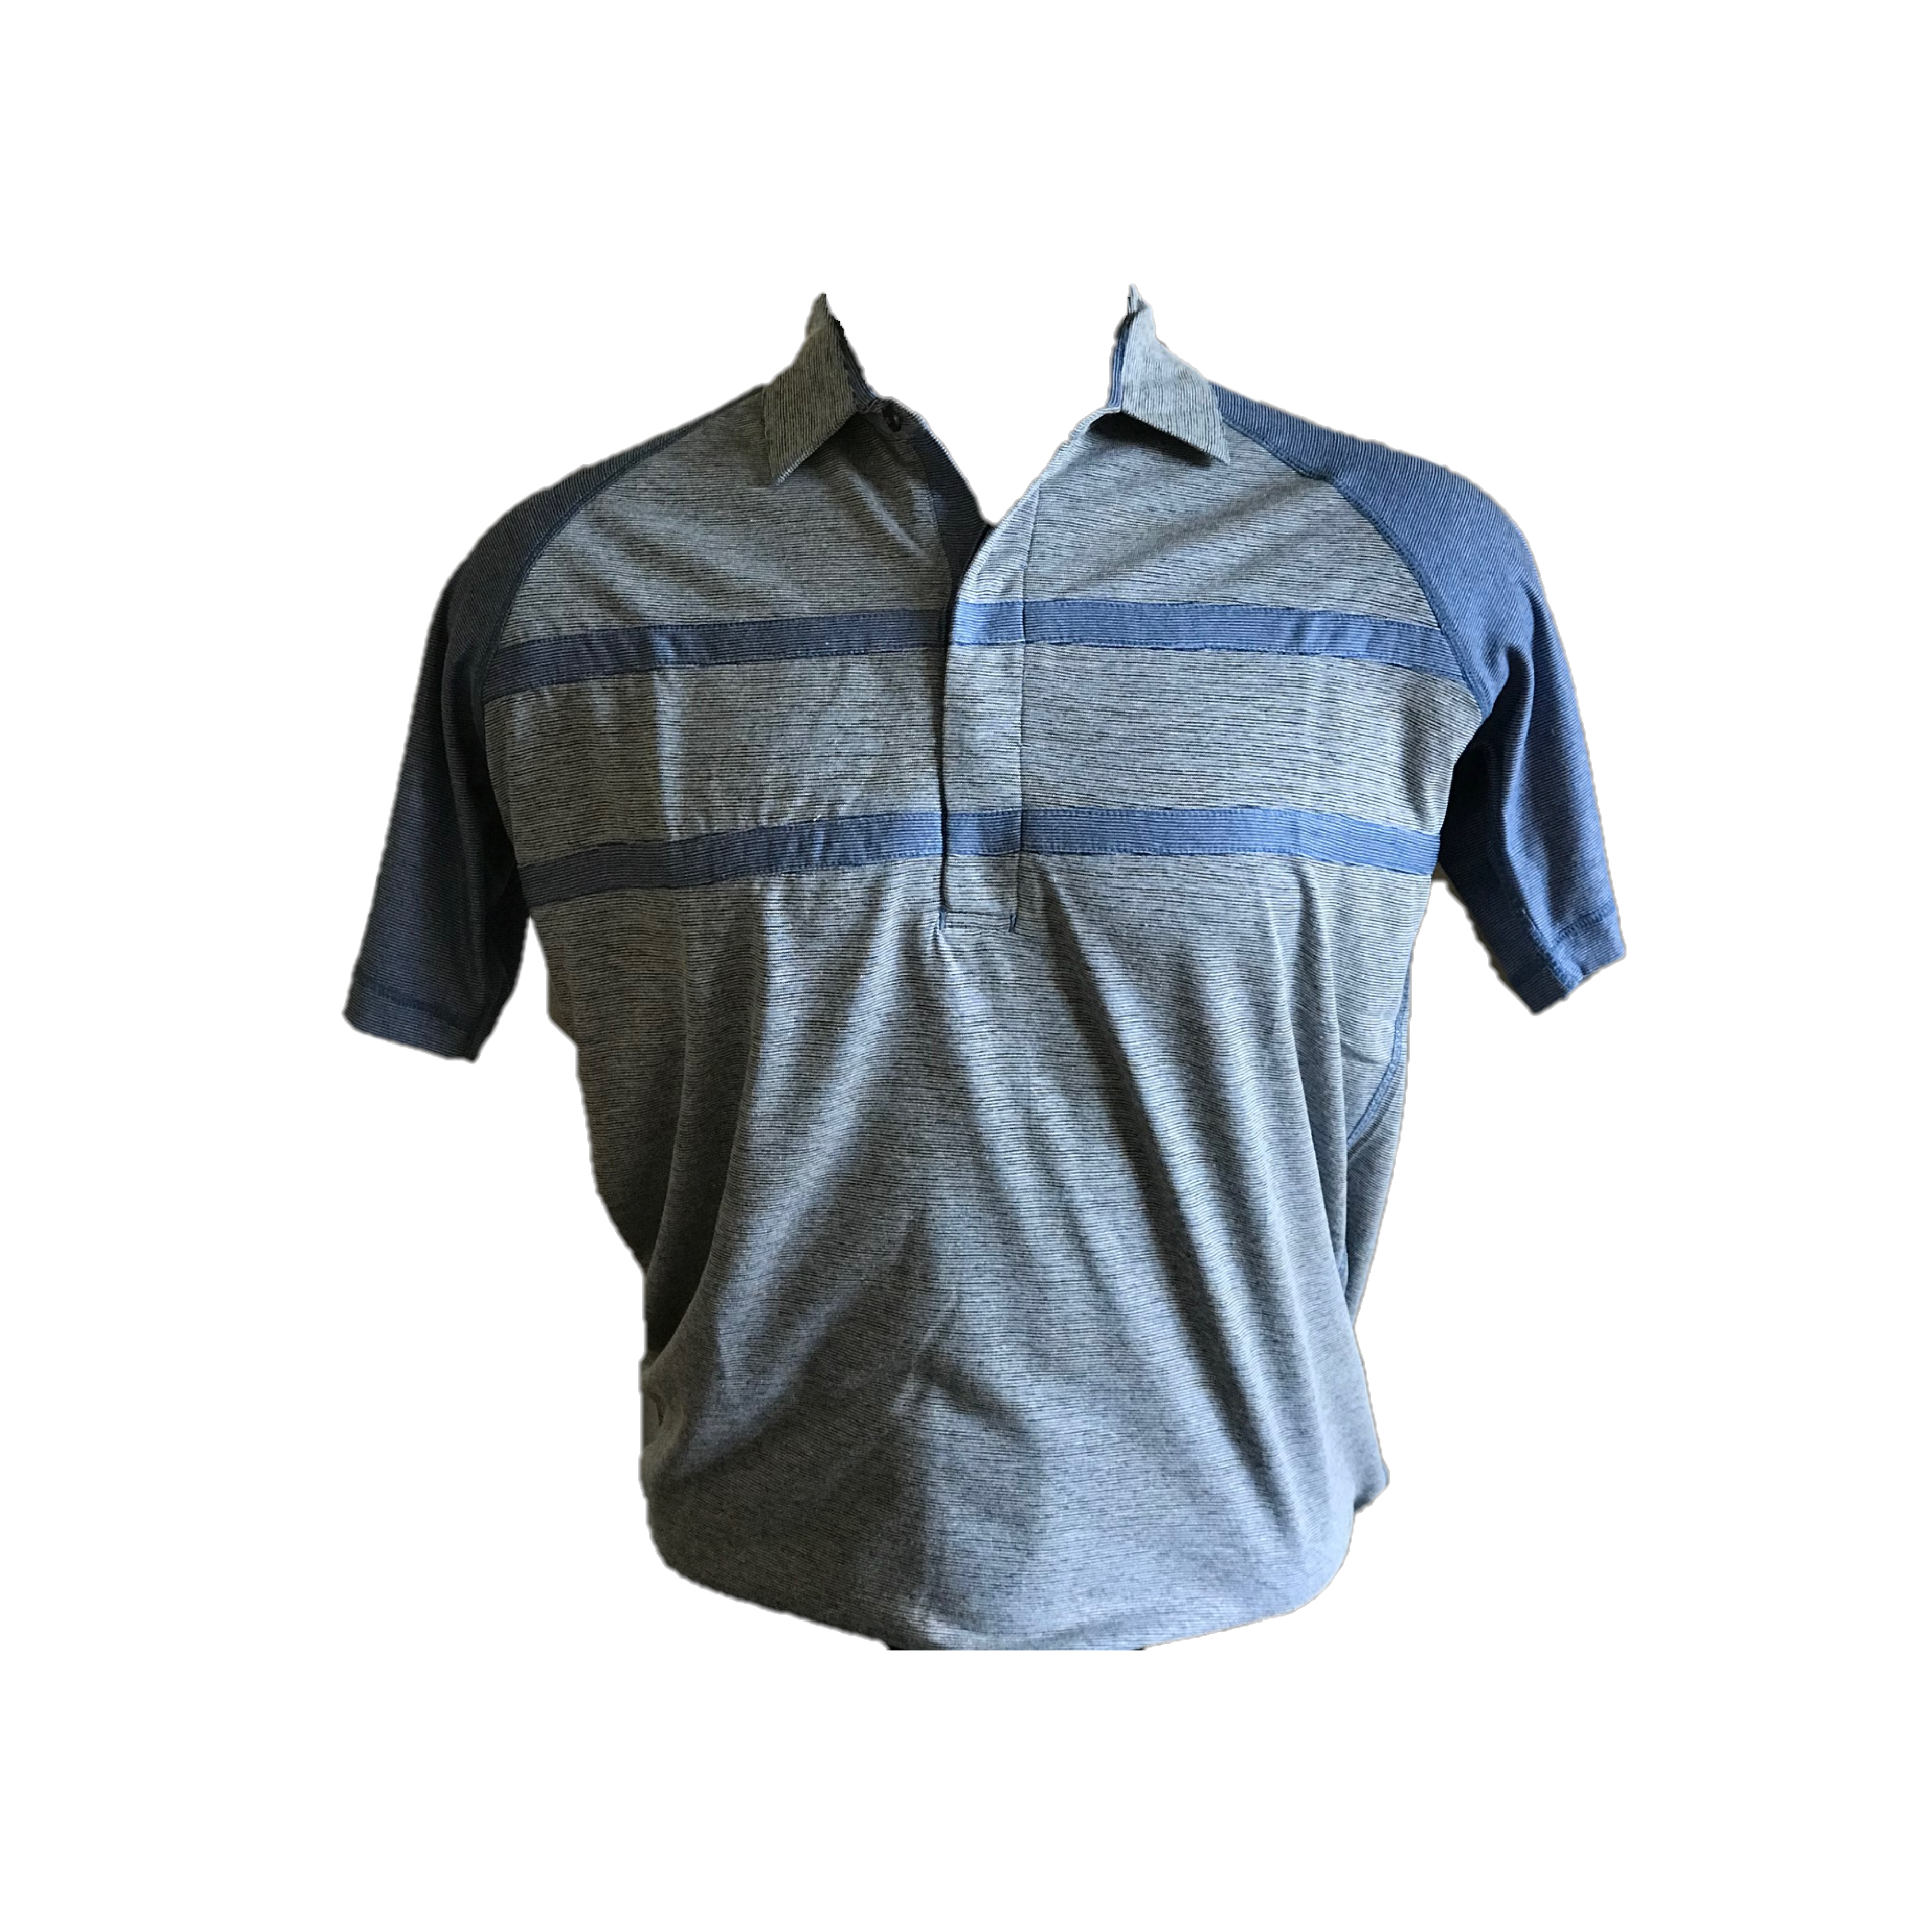 MT-020 || Men Top Blue with Grey Horizontal Chest Stripes.